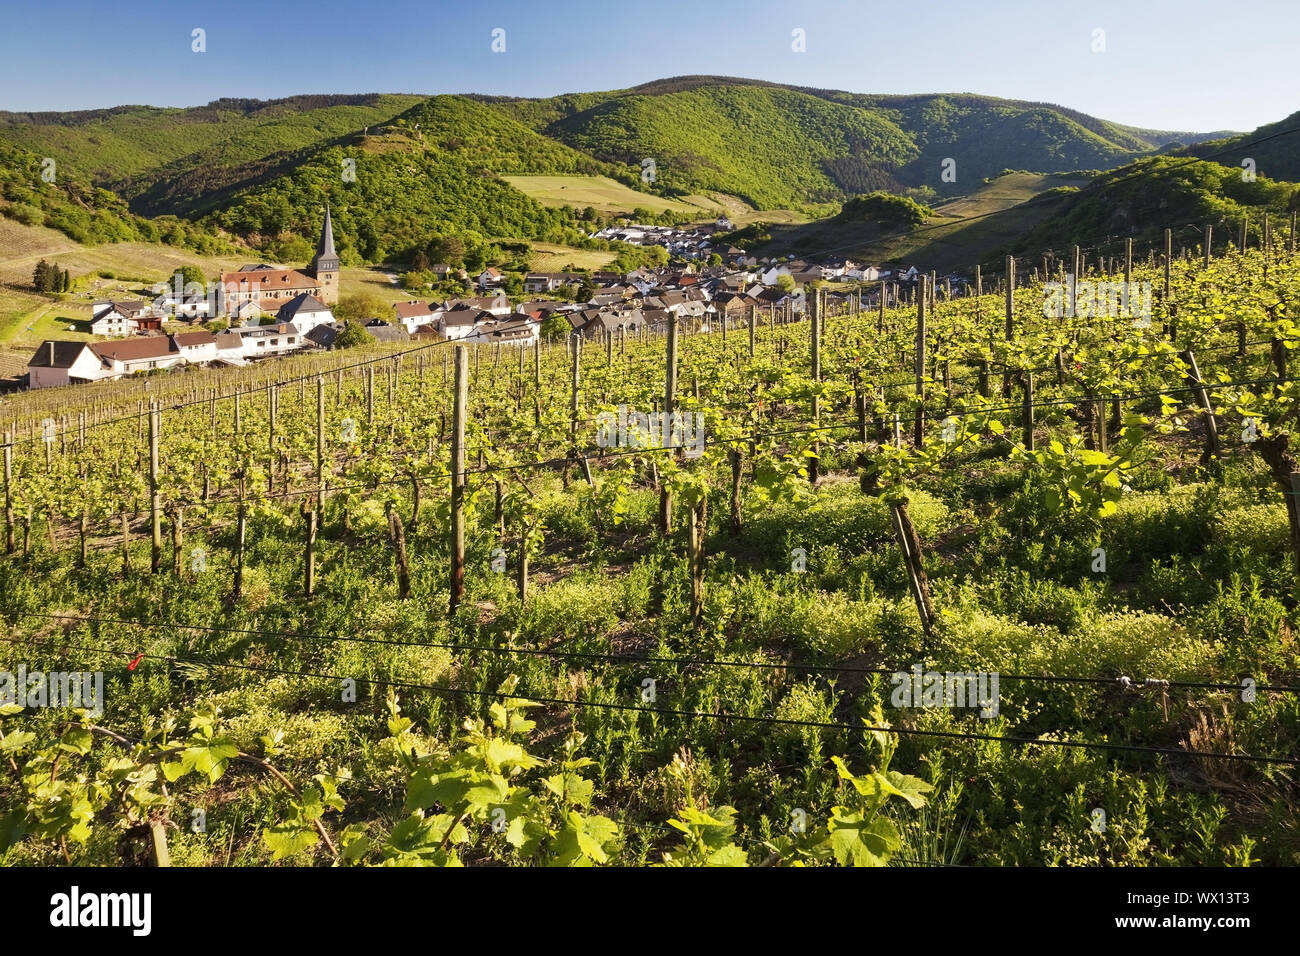 View over the vineyards to the place Mayschoss, Ahrtal, Eifel, Rhineland-Palatinate, Germany, Europe Stock Photo